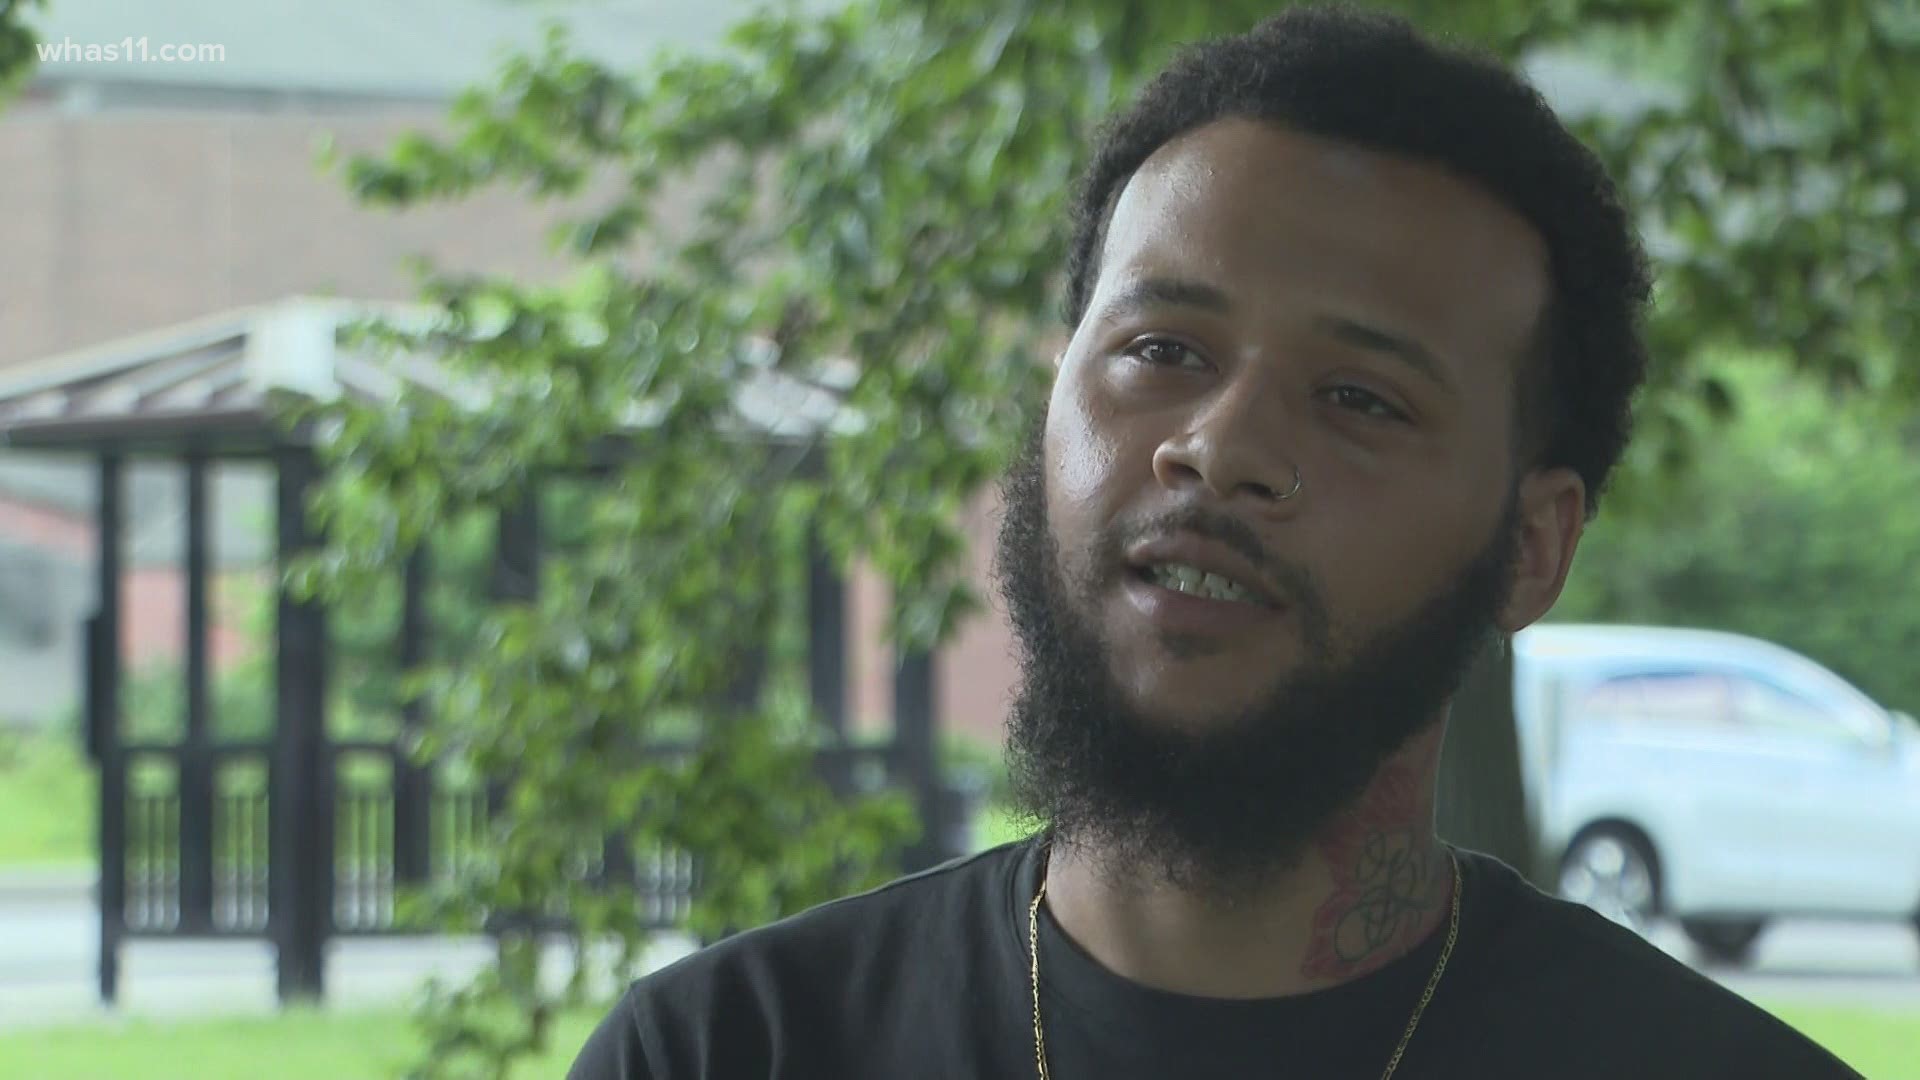 Devon Robinson's brother Dominick Clayton tells WHAS11 Friday that this is part of an even bigger ongoing issue with young people going down the wrong path.